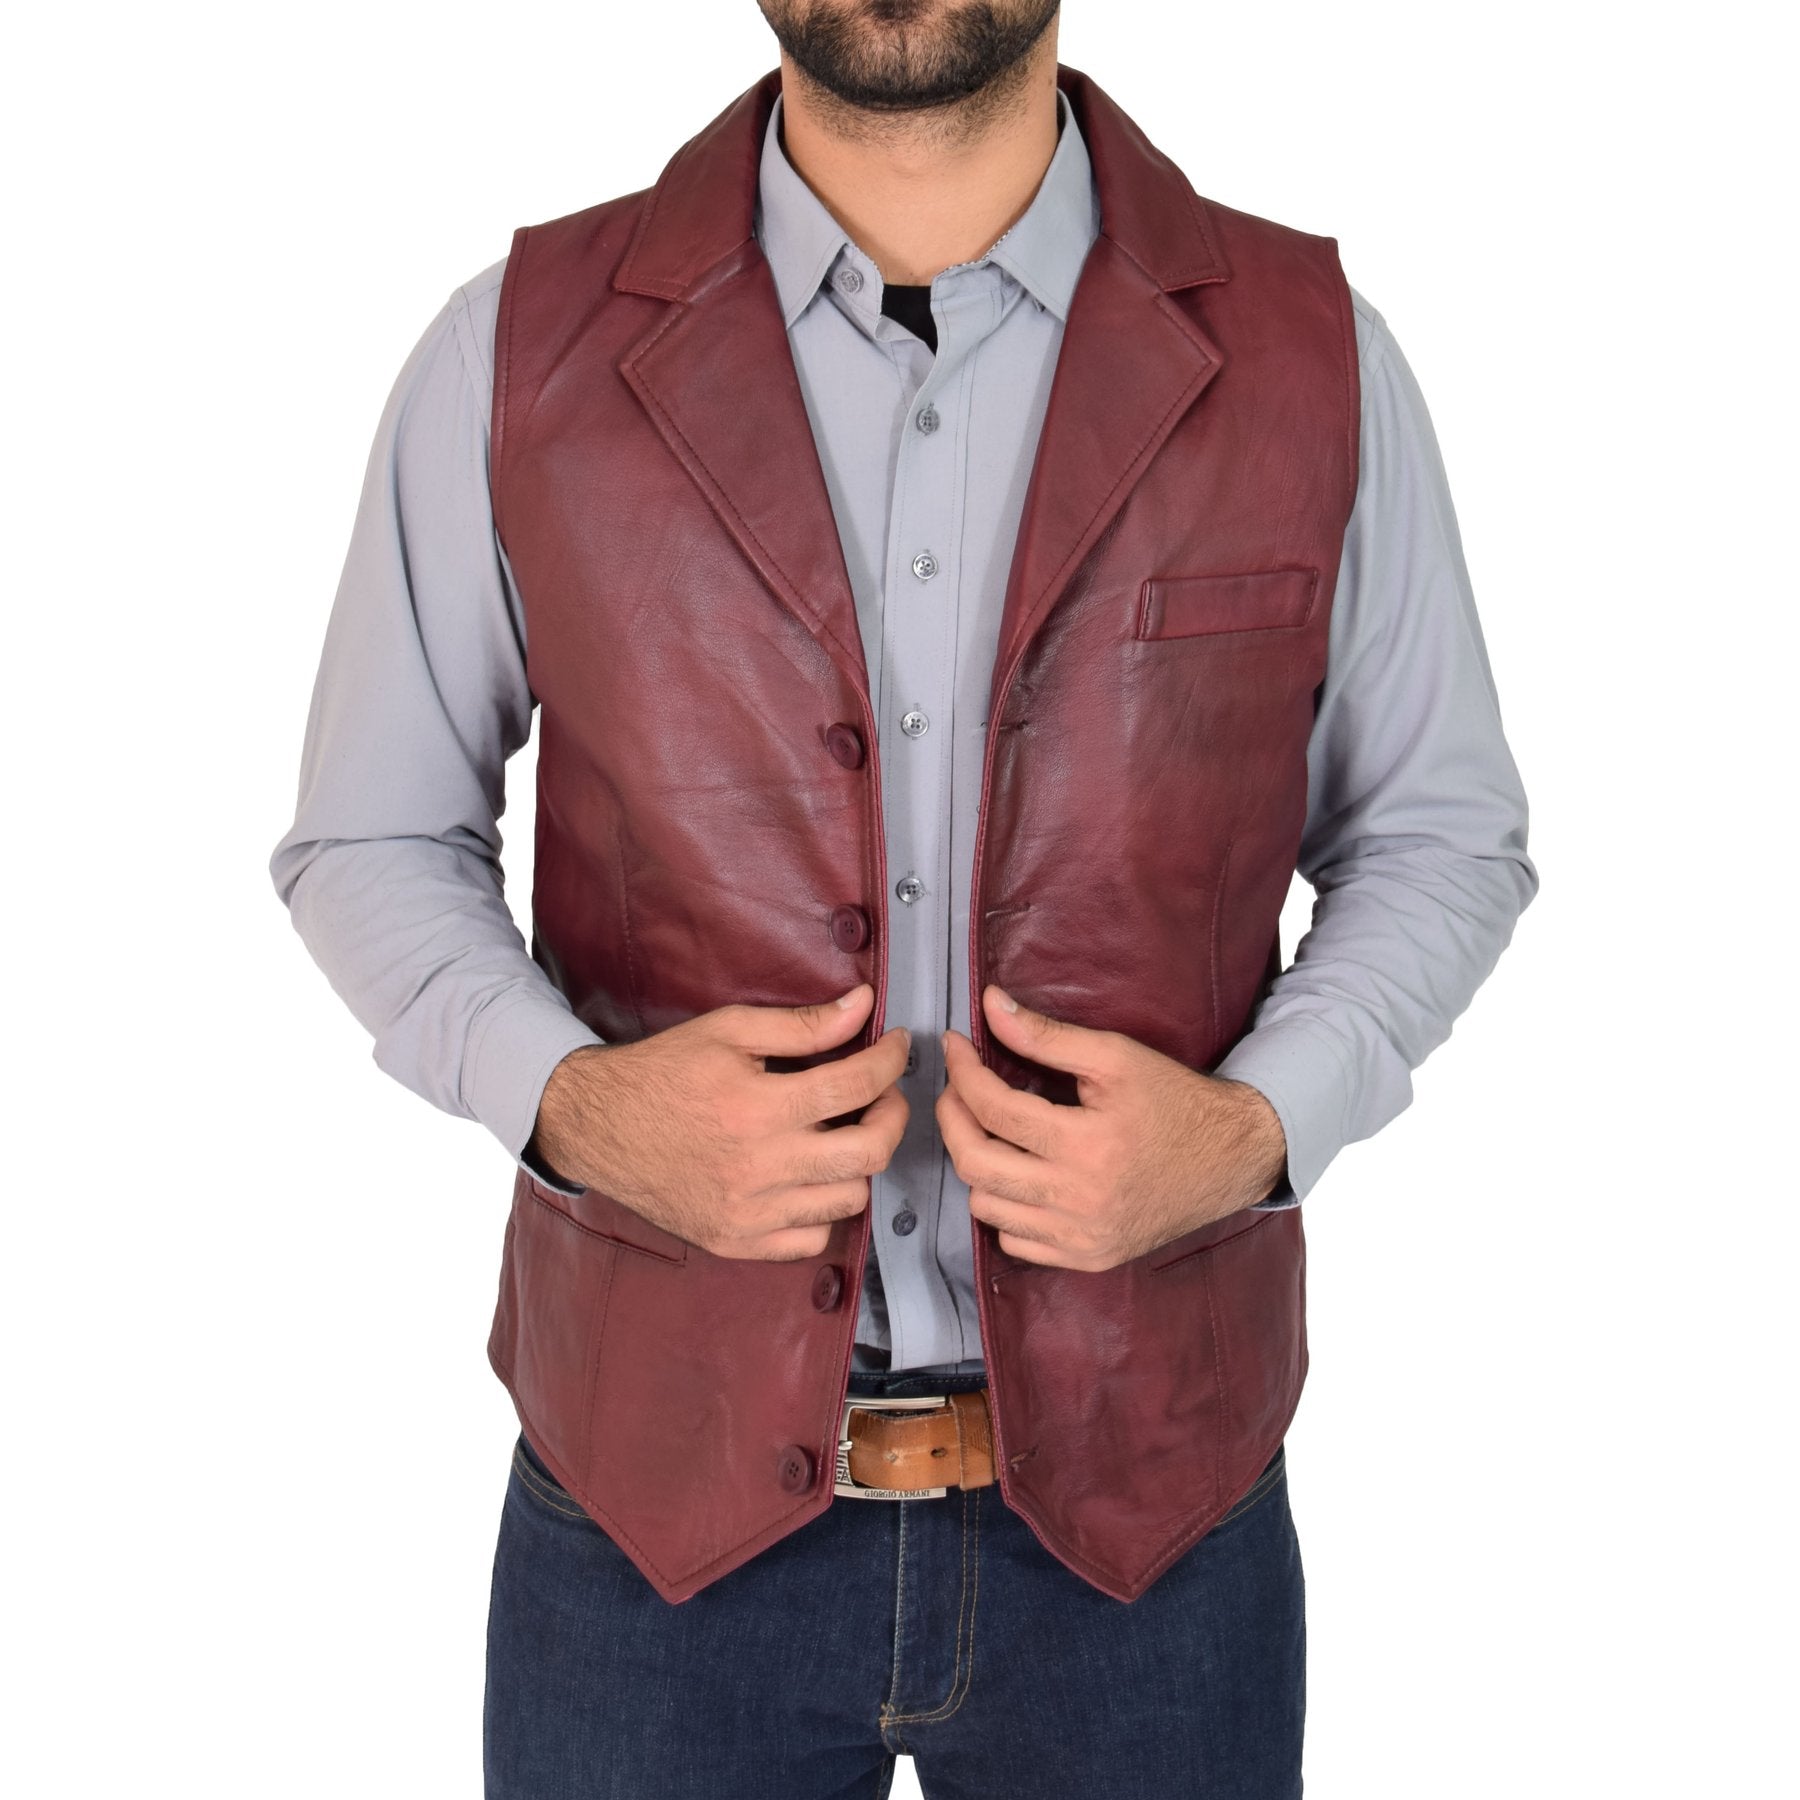 Spine Spark Men's Motorbike Soft Leather Brown Classic Style Vest